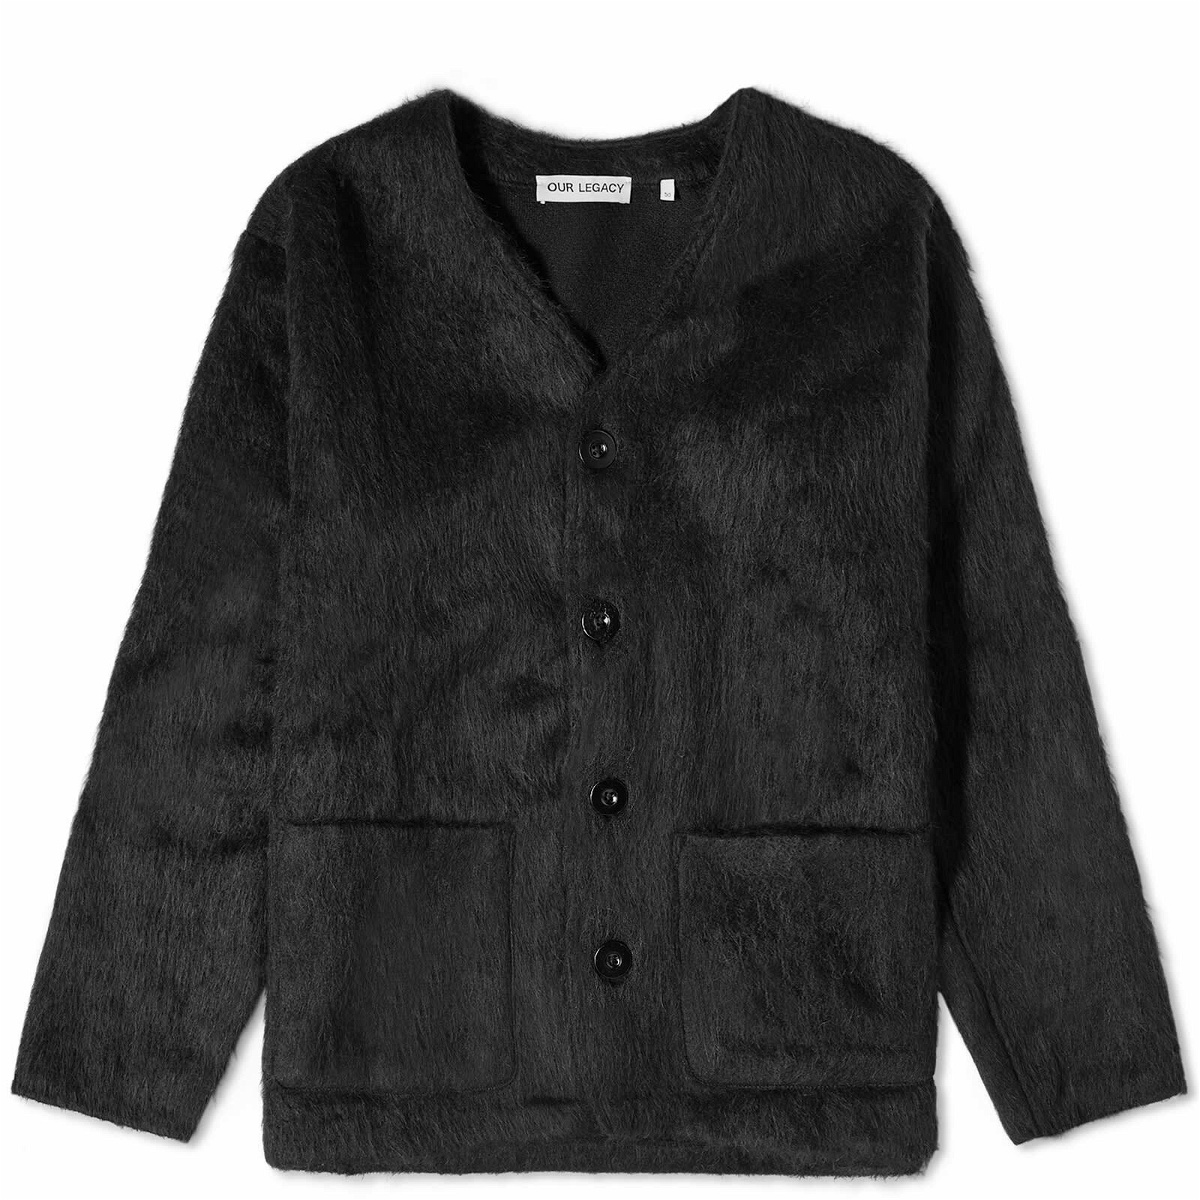 Photo: Our Legacy Men's Mohair Cardigan in Black Mohair